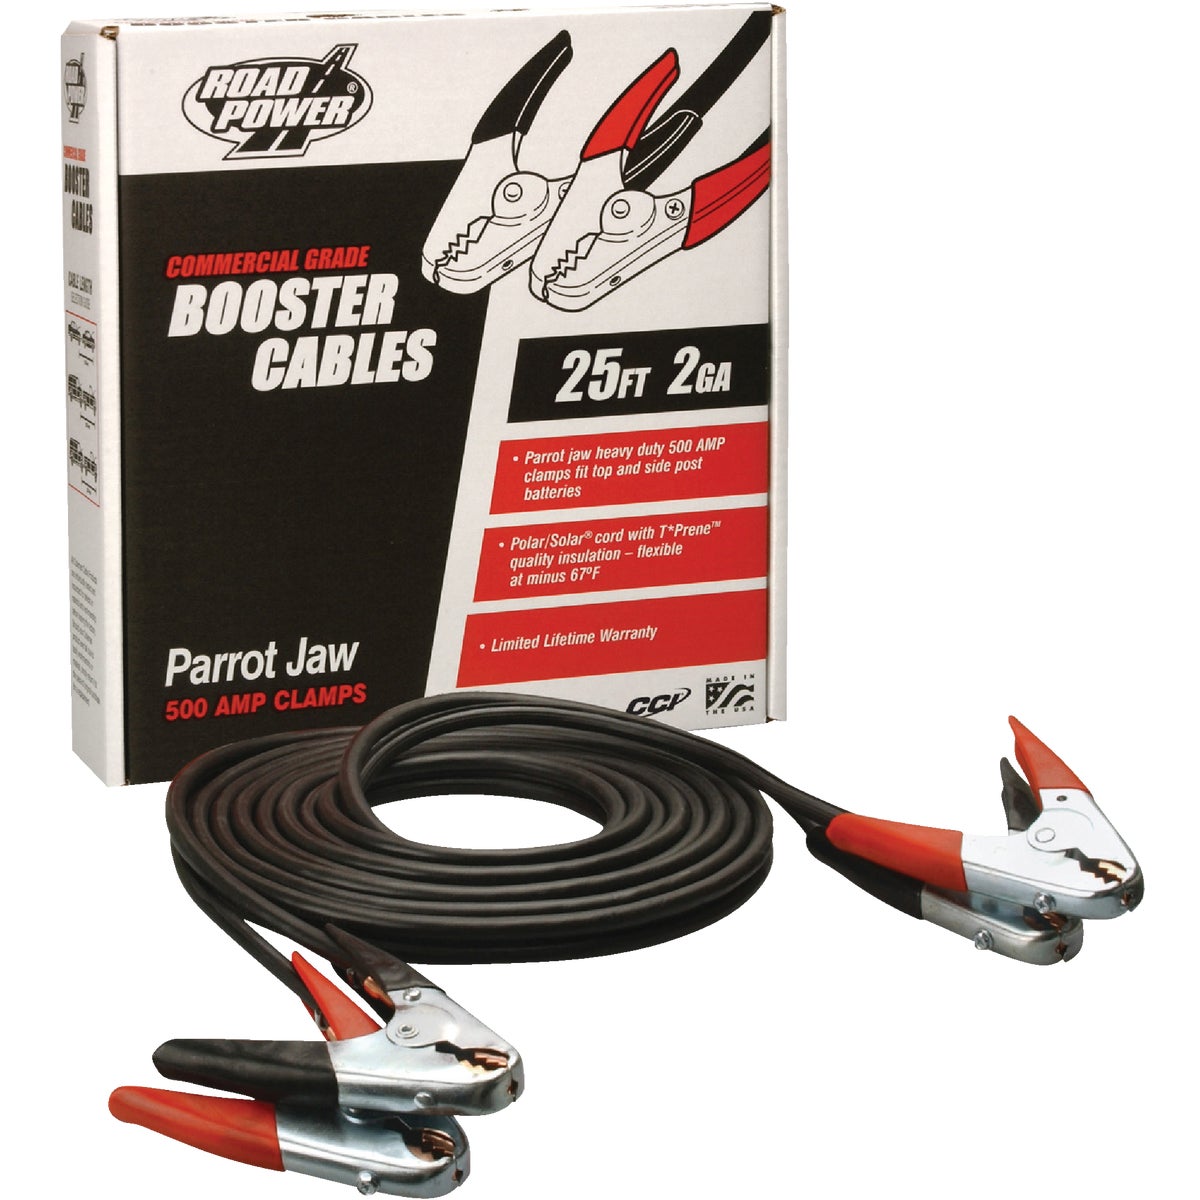 Item 577290, No-Tangle booster cable.